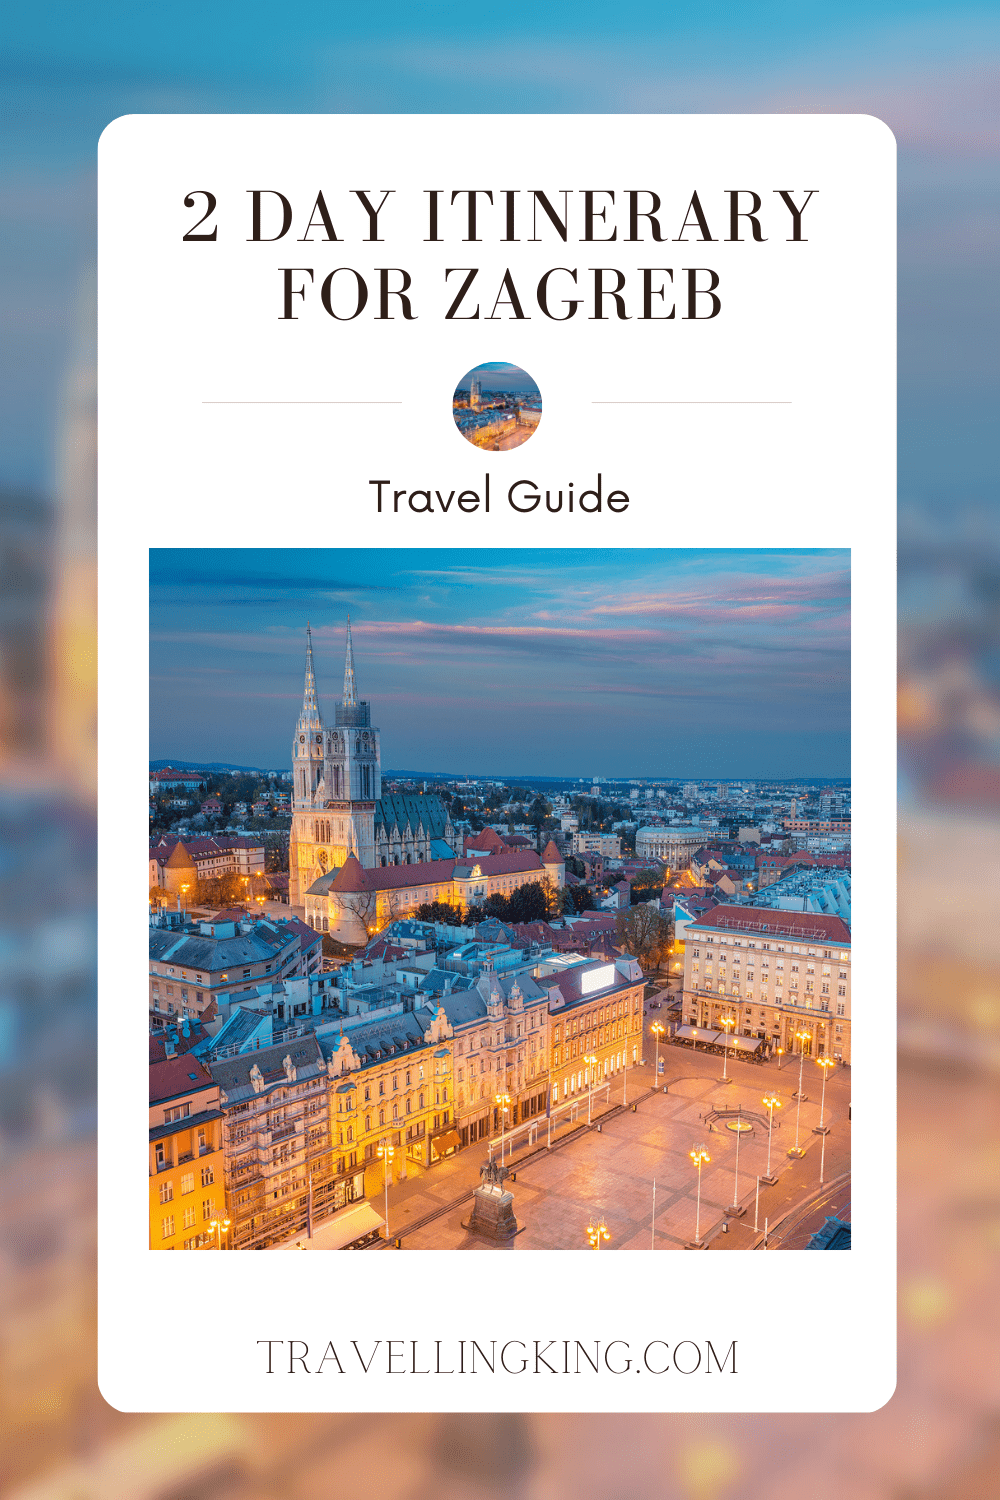 2 Day Itinerary for Zagreb